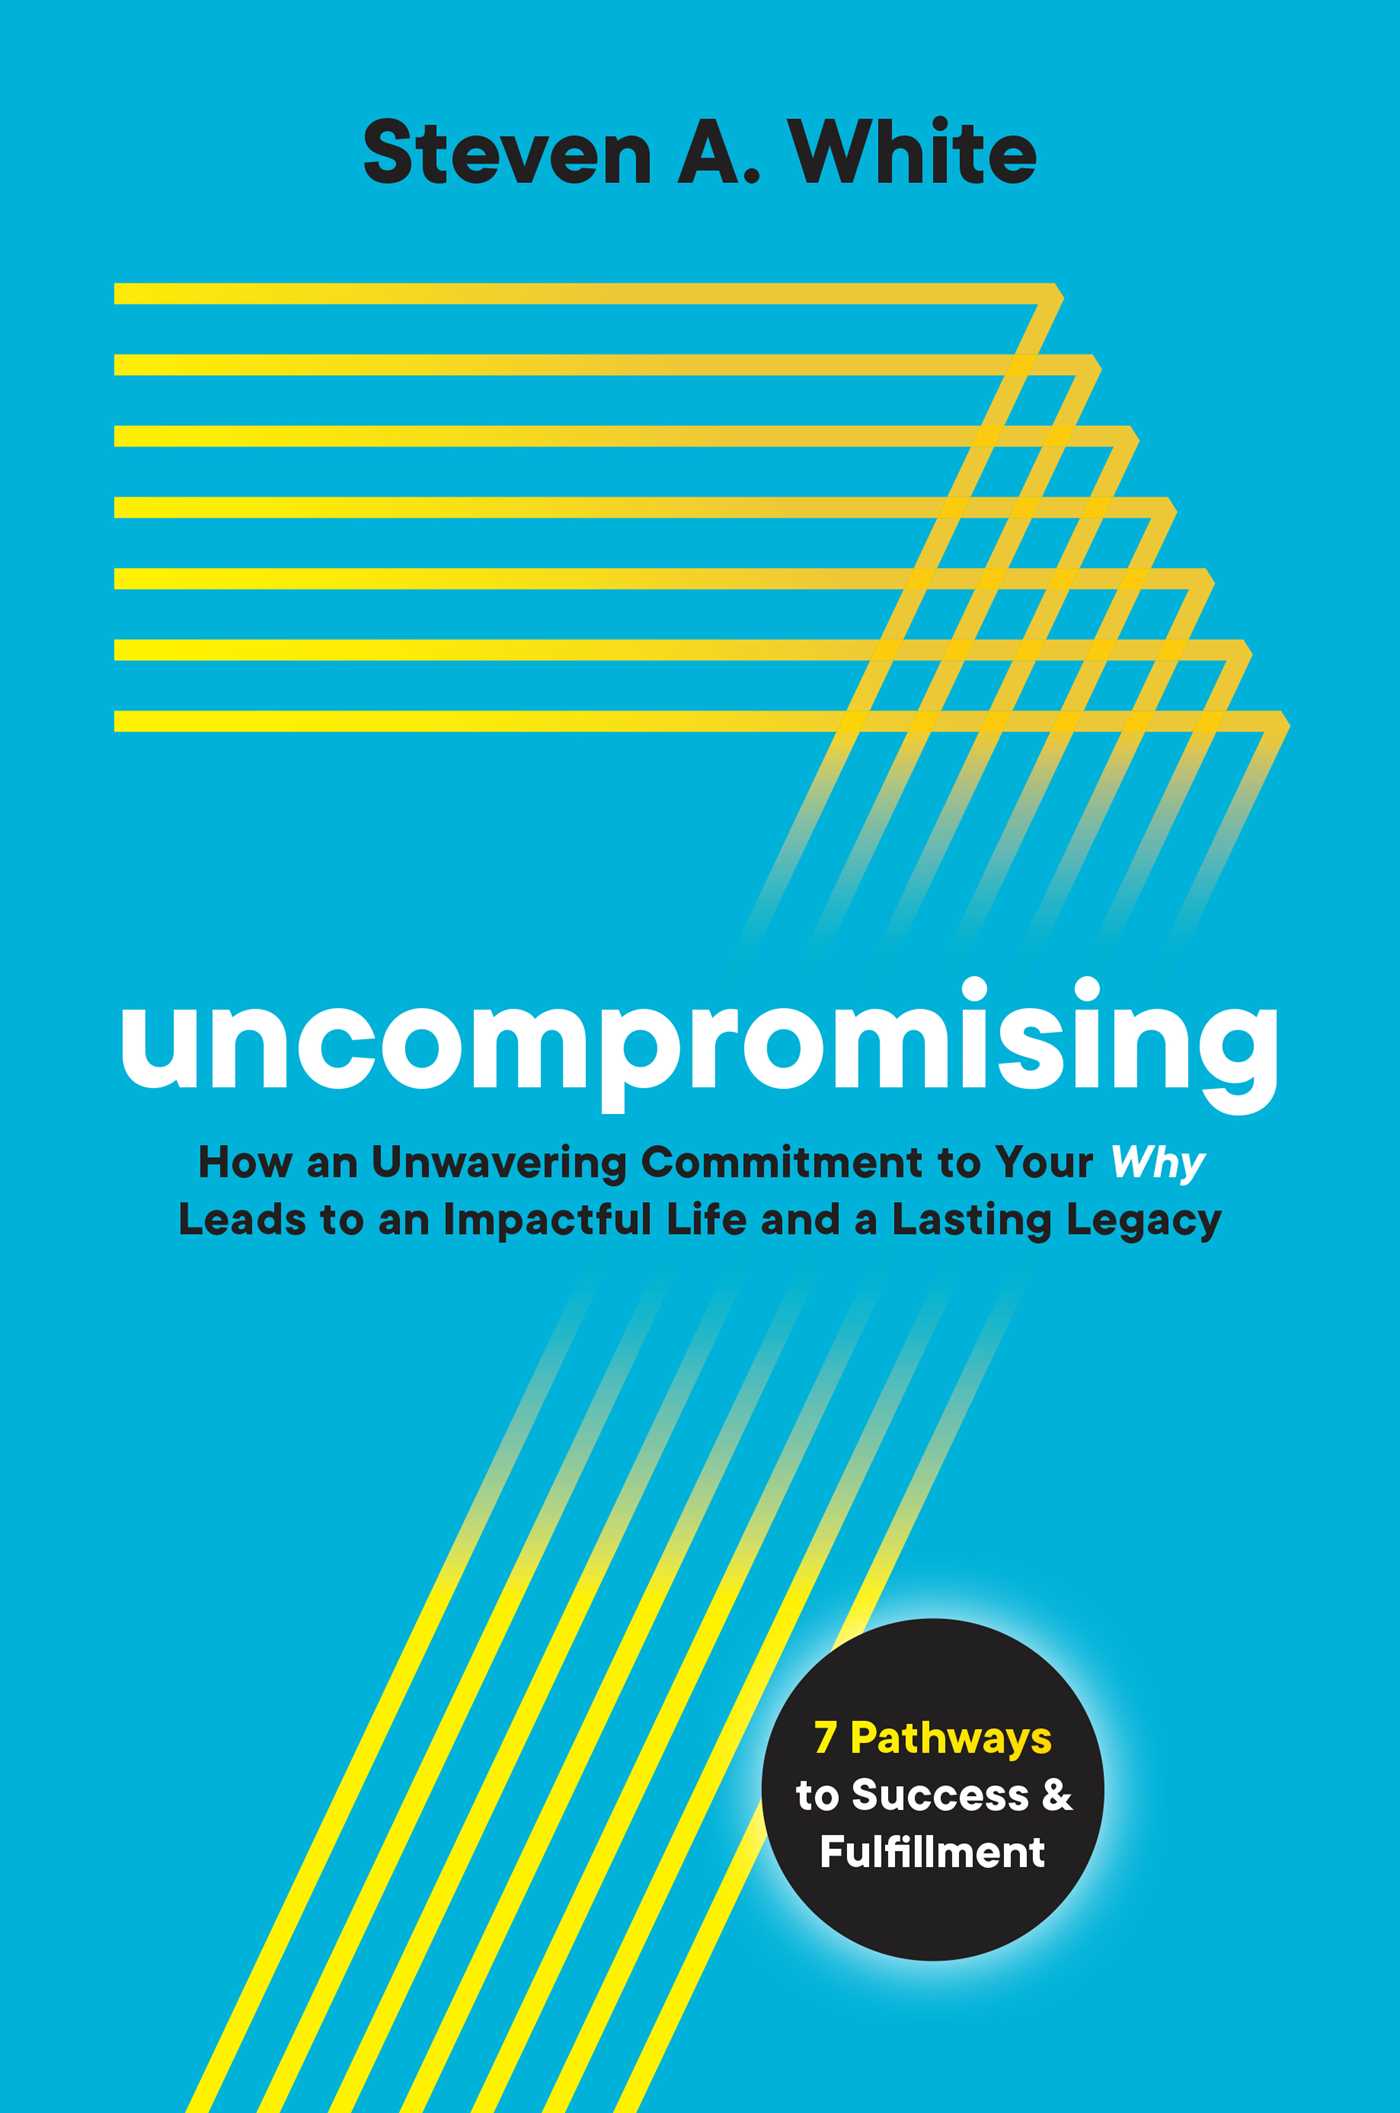 Uncompromising: How an Unwavering Commitment to Your Why Leads to an Impactful Life and a Lasting Legacy Steven A. White Book Cover